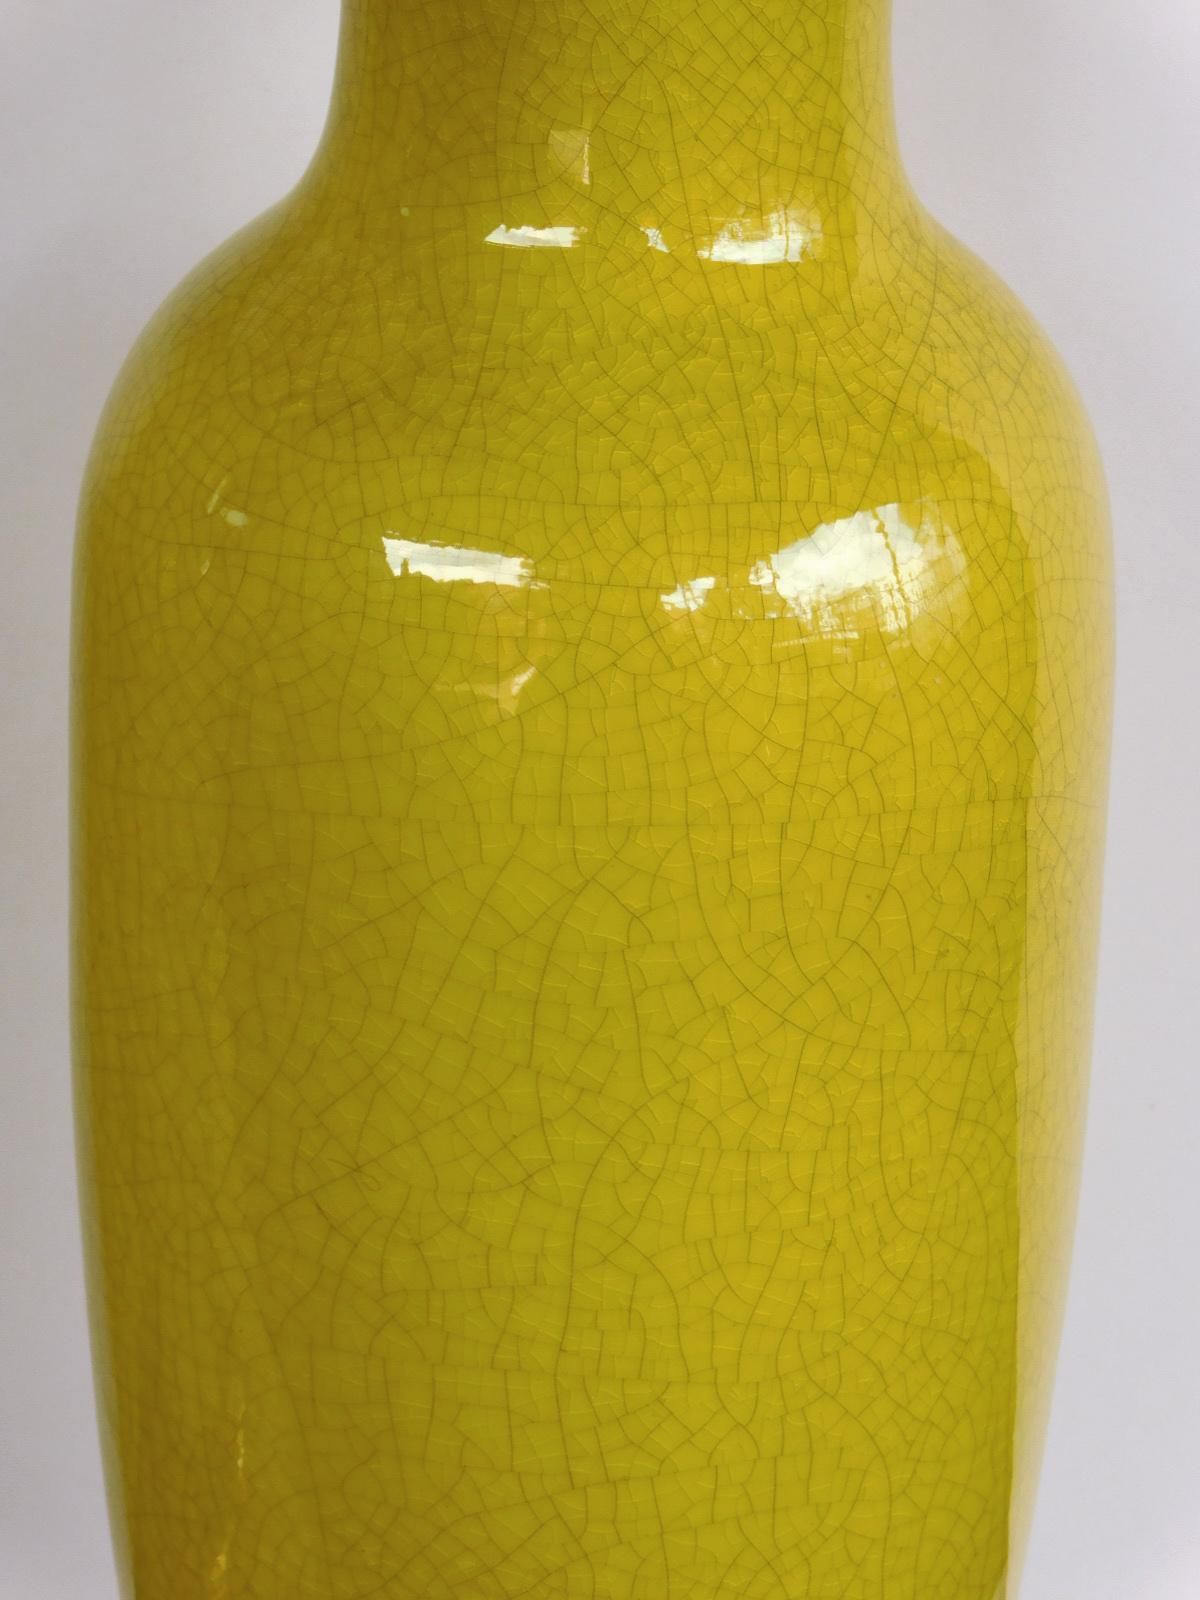 Chinese Export Pair of Chinese Chartreuse-Yellow Crackle-Glaze Ceramic Lamps